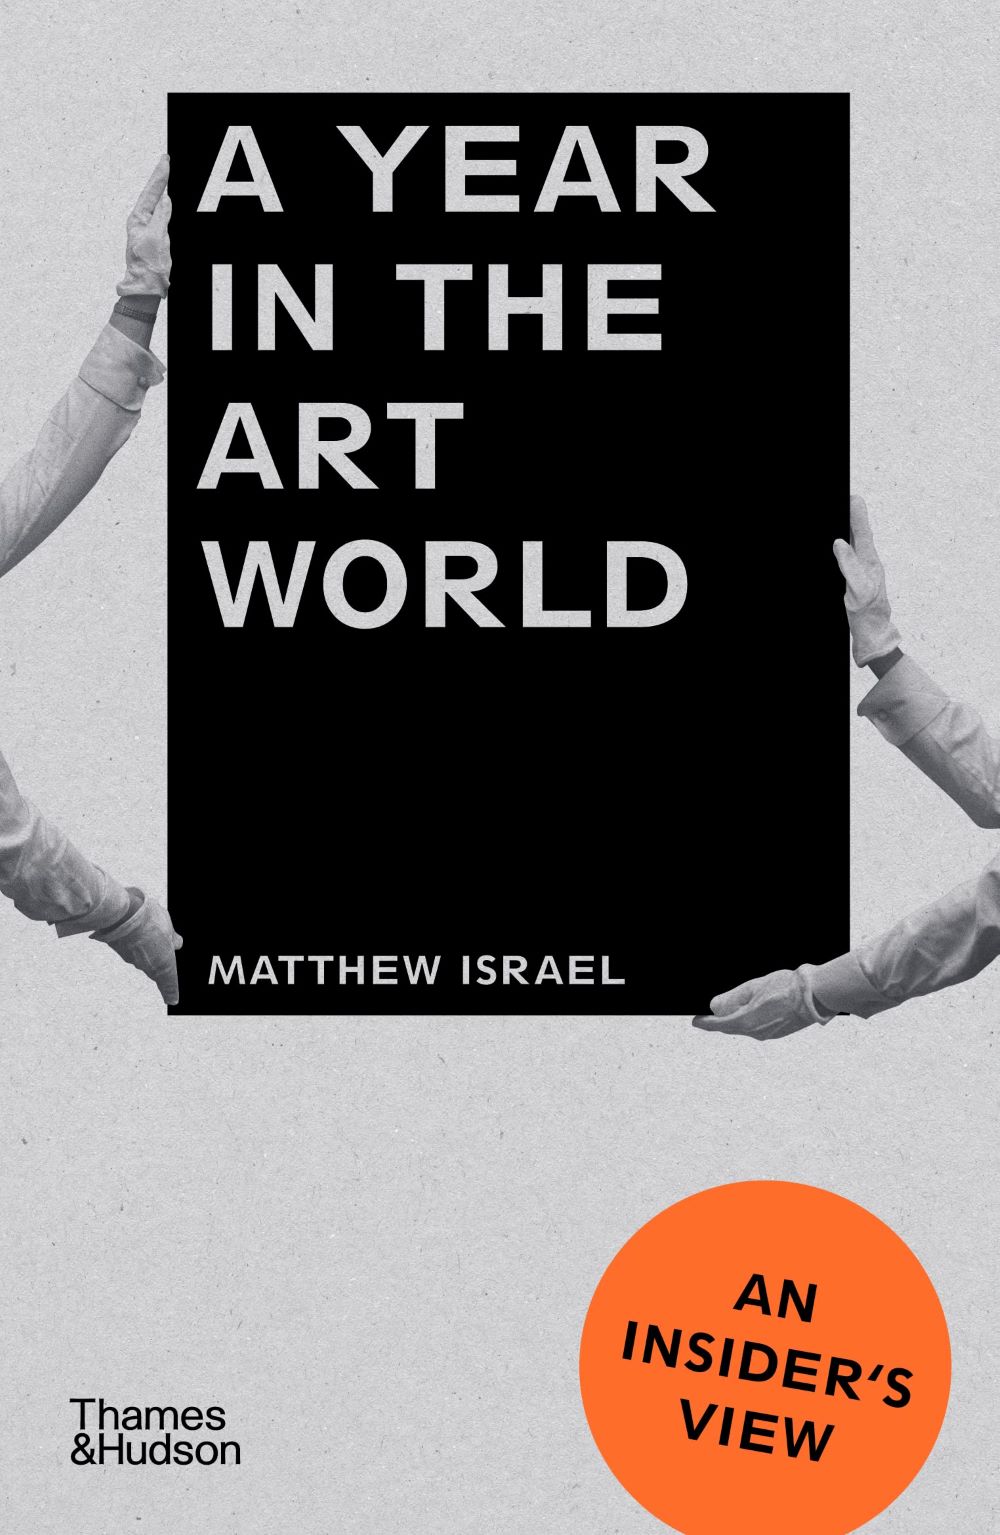 A_Year_in_the_art_world_book_front_cover